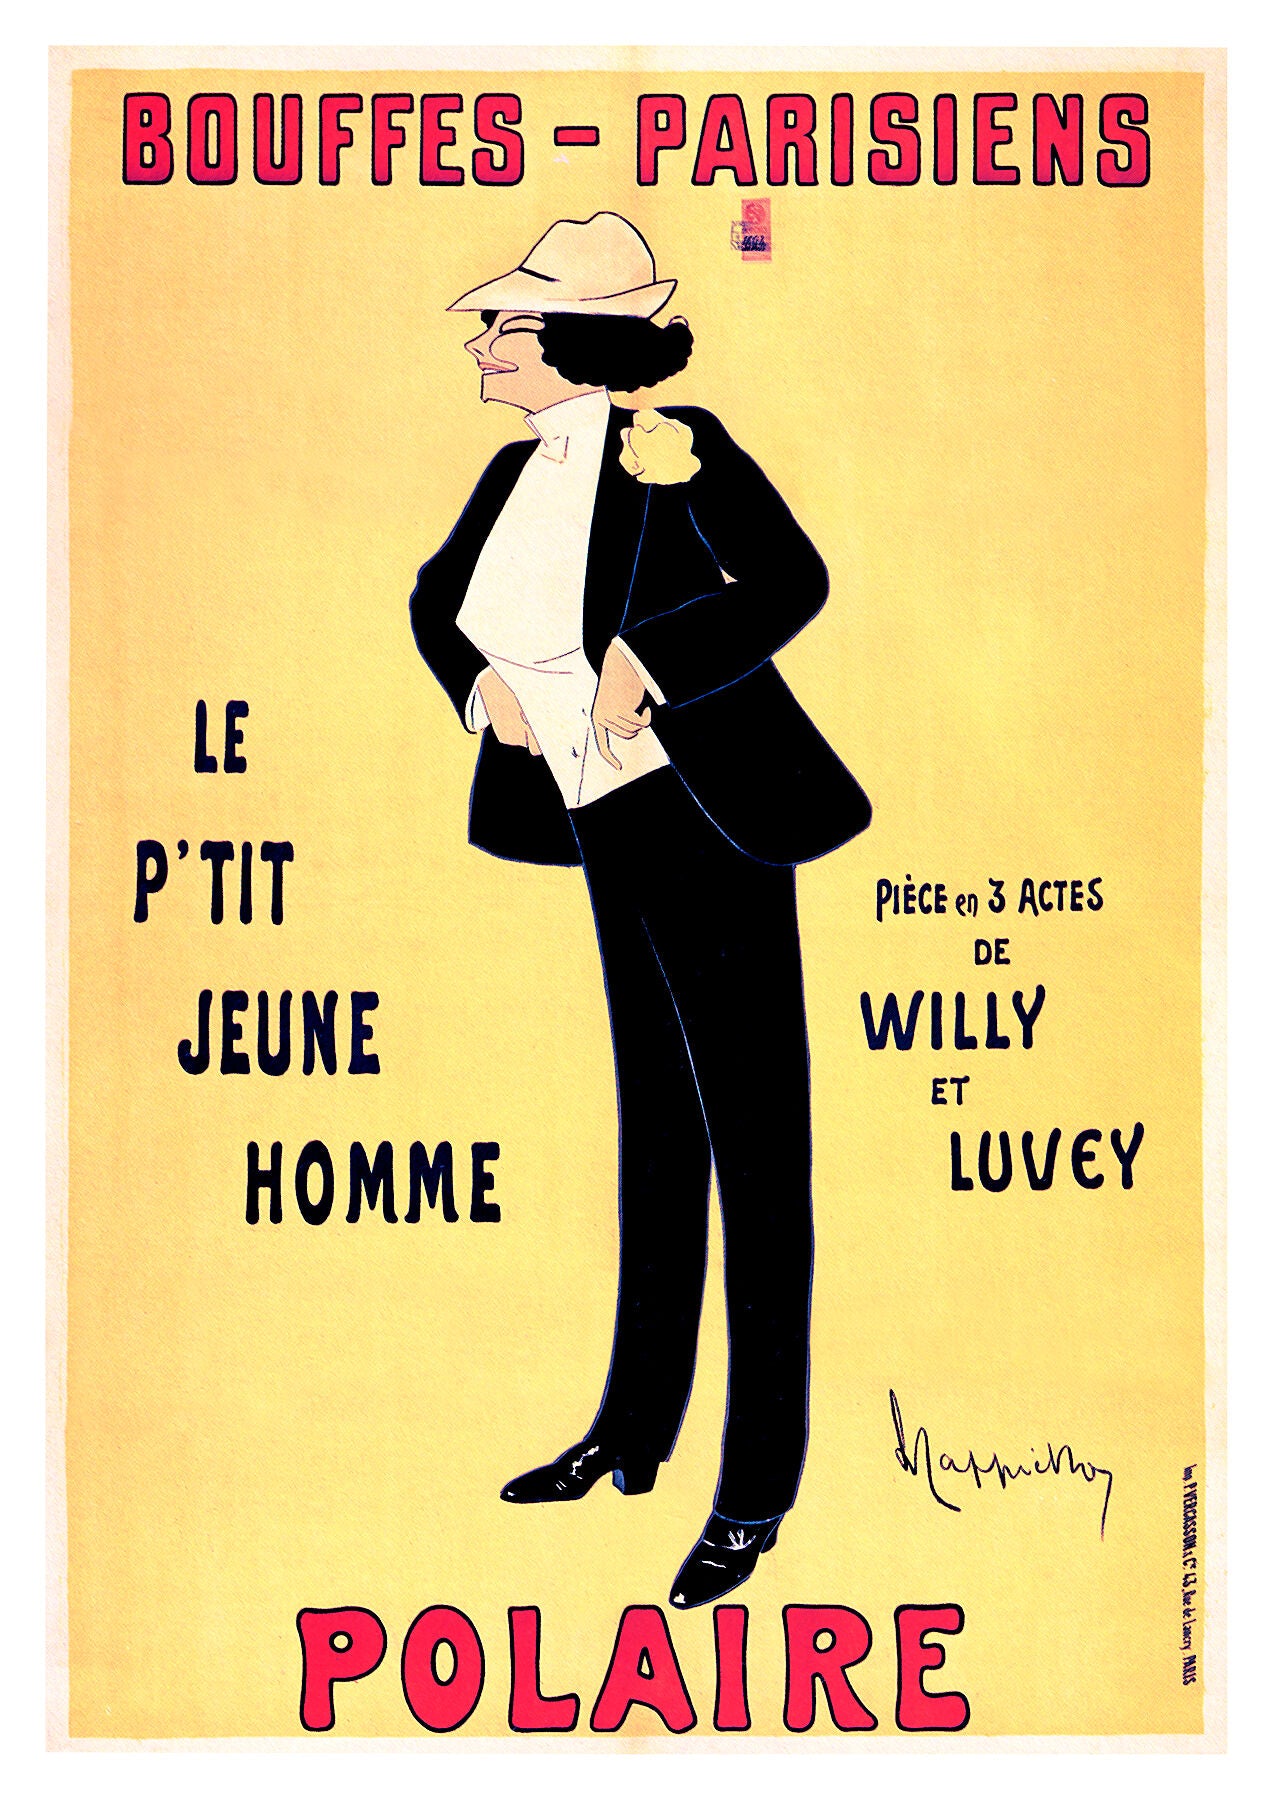 Bouffes-Parisiens theatre poster by Leonetto Cappiello featuring the actress Polaire in her husband Willy's play called Le P'tit Jeune Homme